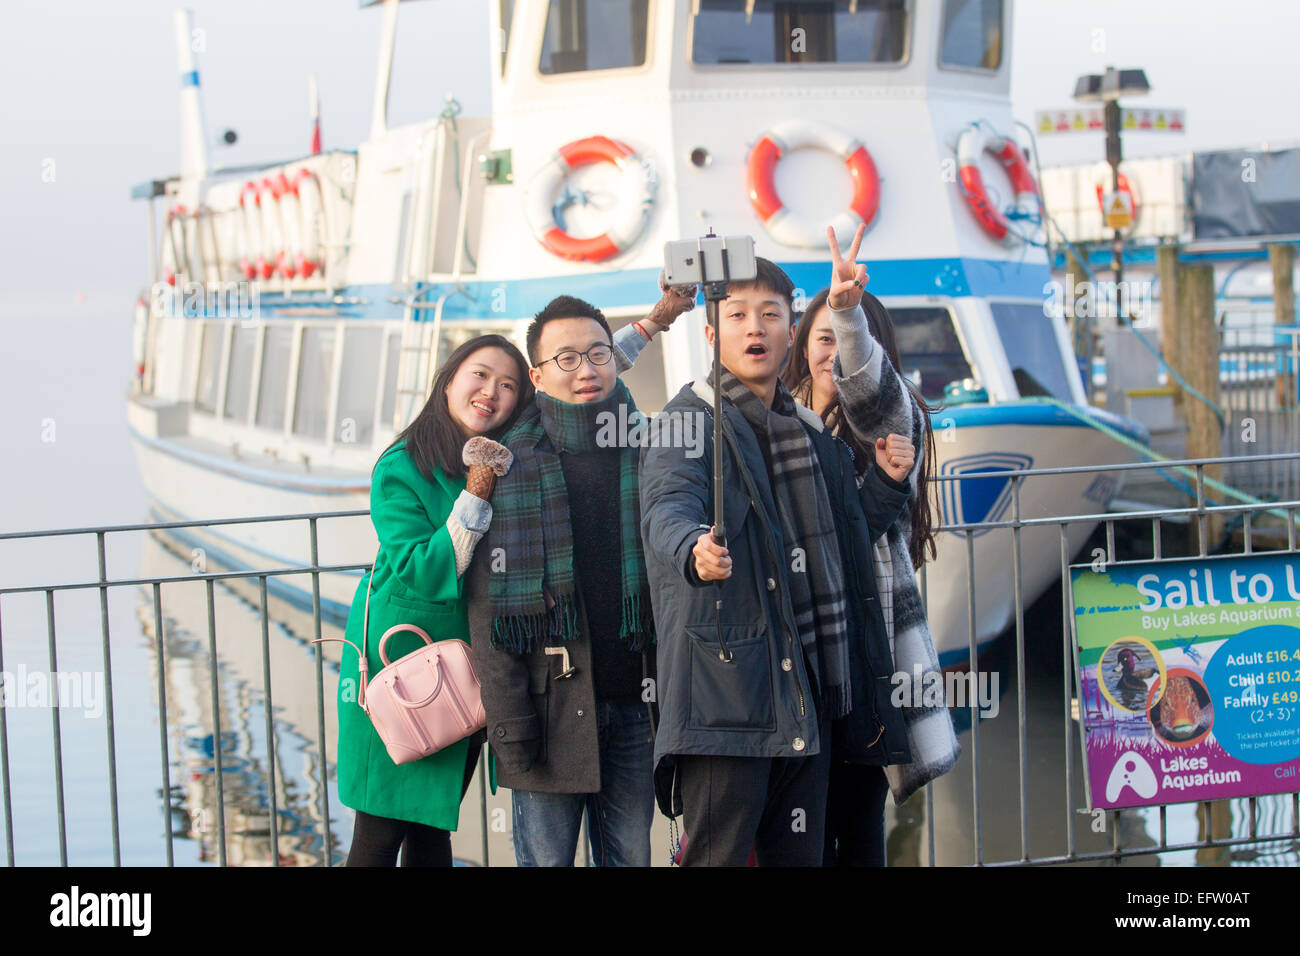 Tourists using mobile smartphone Iphone  selfie - selfies stick  to take photos & video of themselves Stock Photo